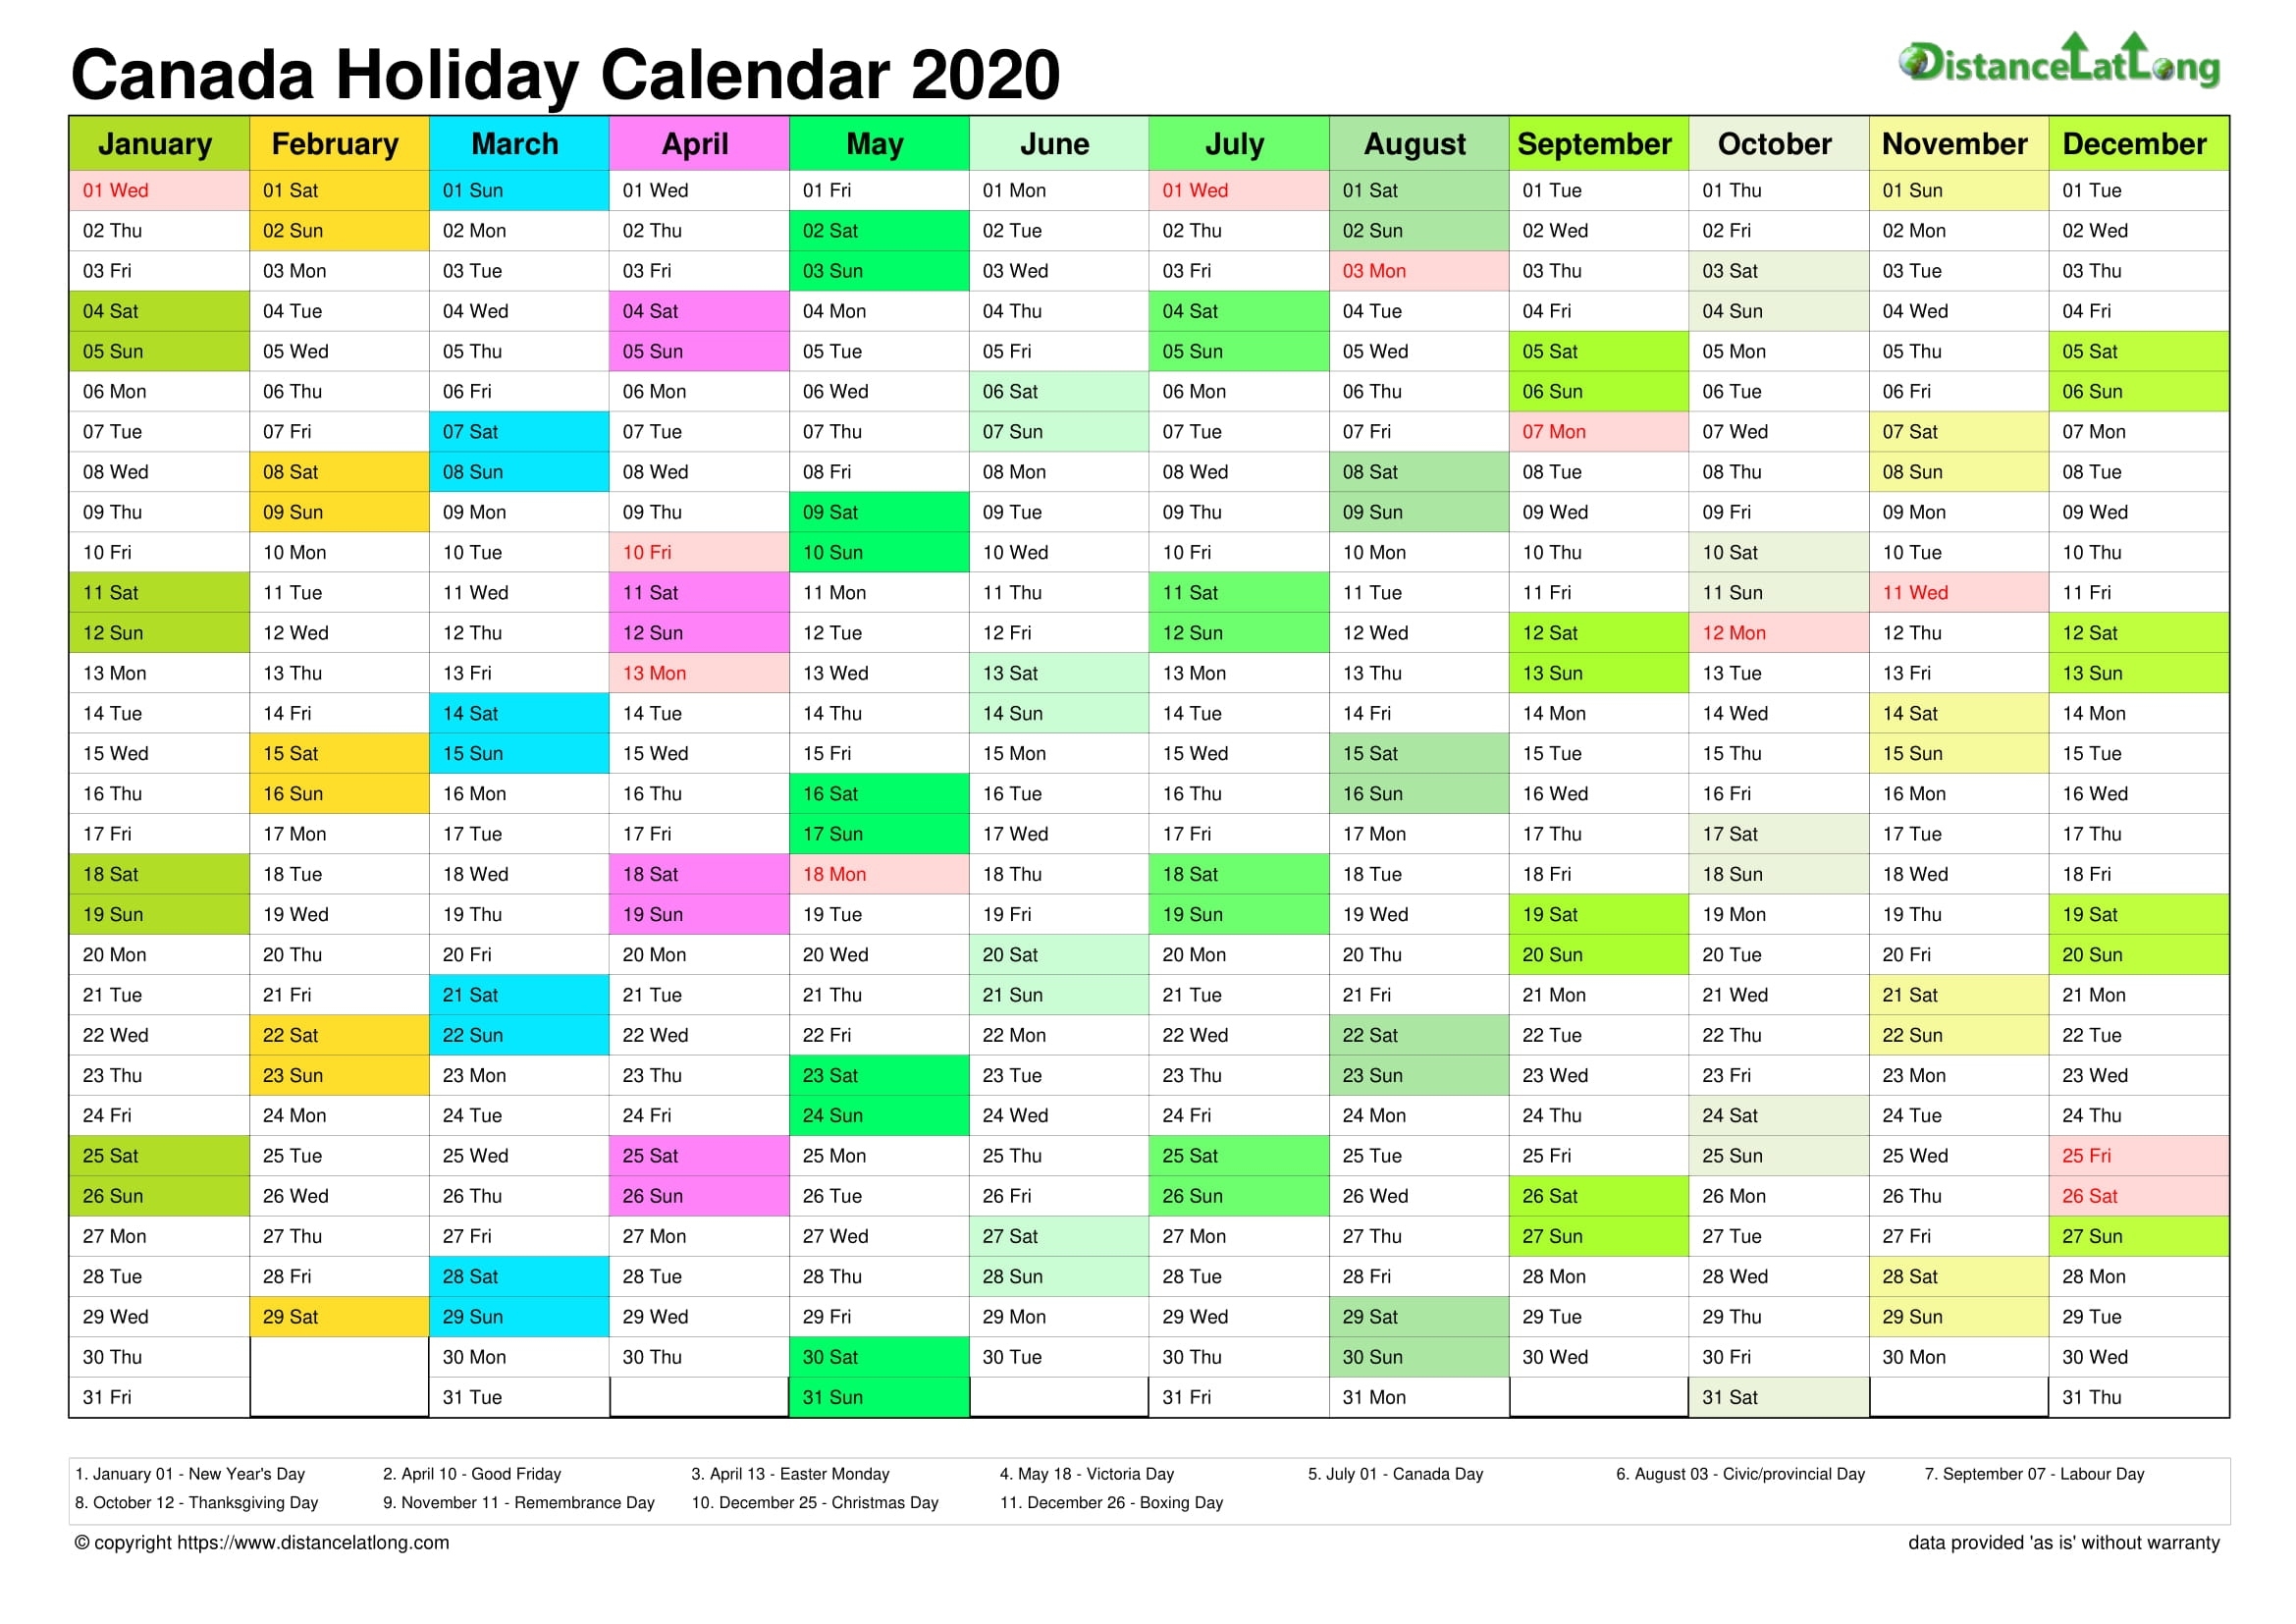 Canada Holiday Calendar 2020 Jpg Templates - Distancelatlong Impressive Calendar Of Religious Events For Canadian Jews In 2020